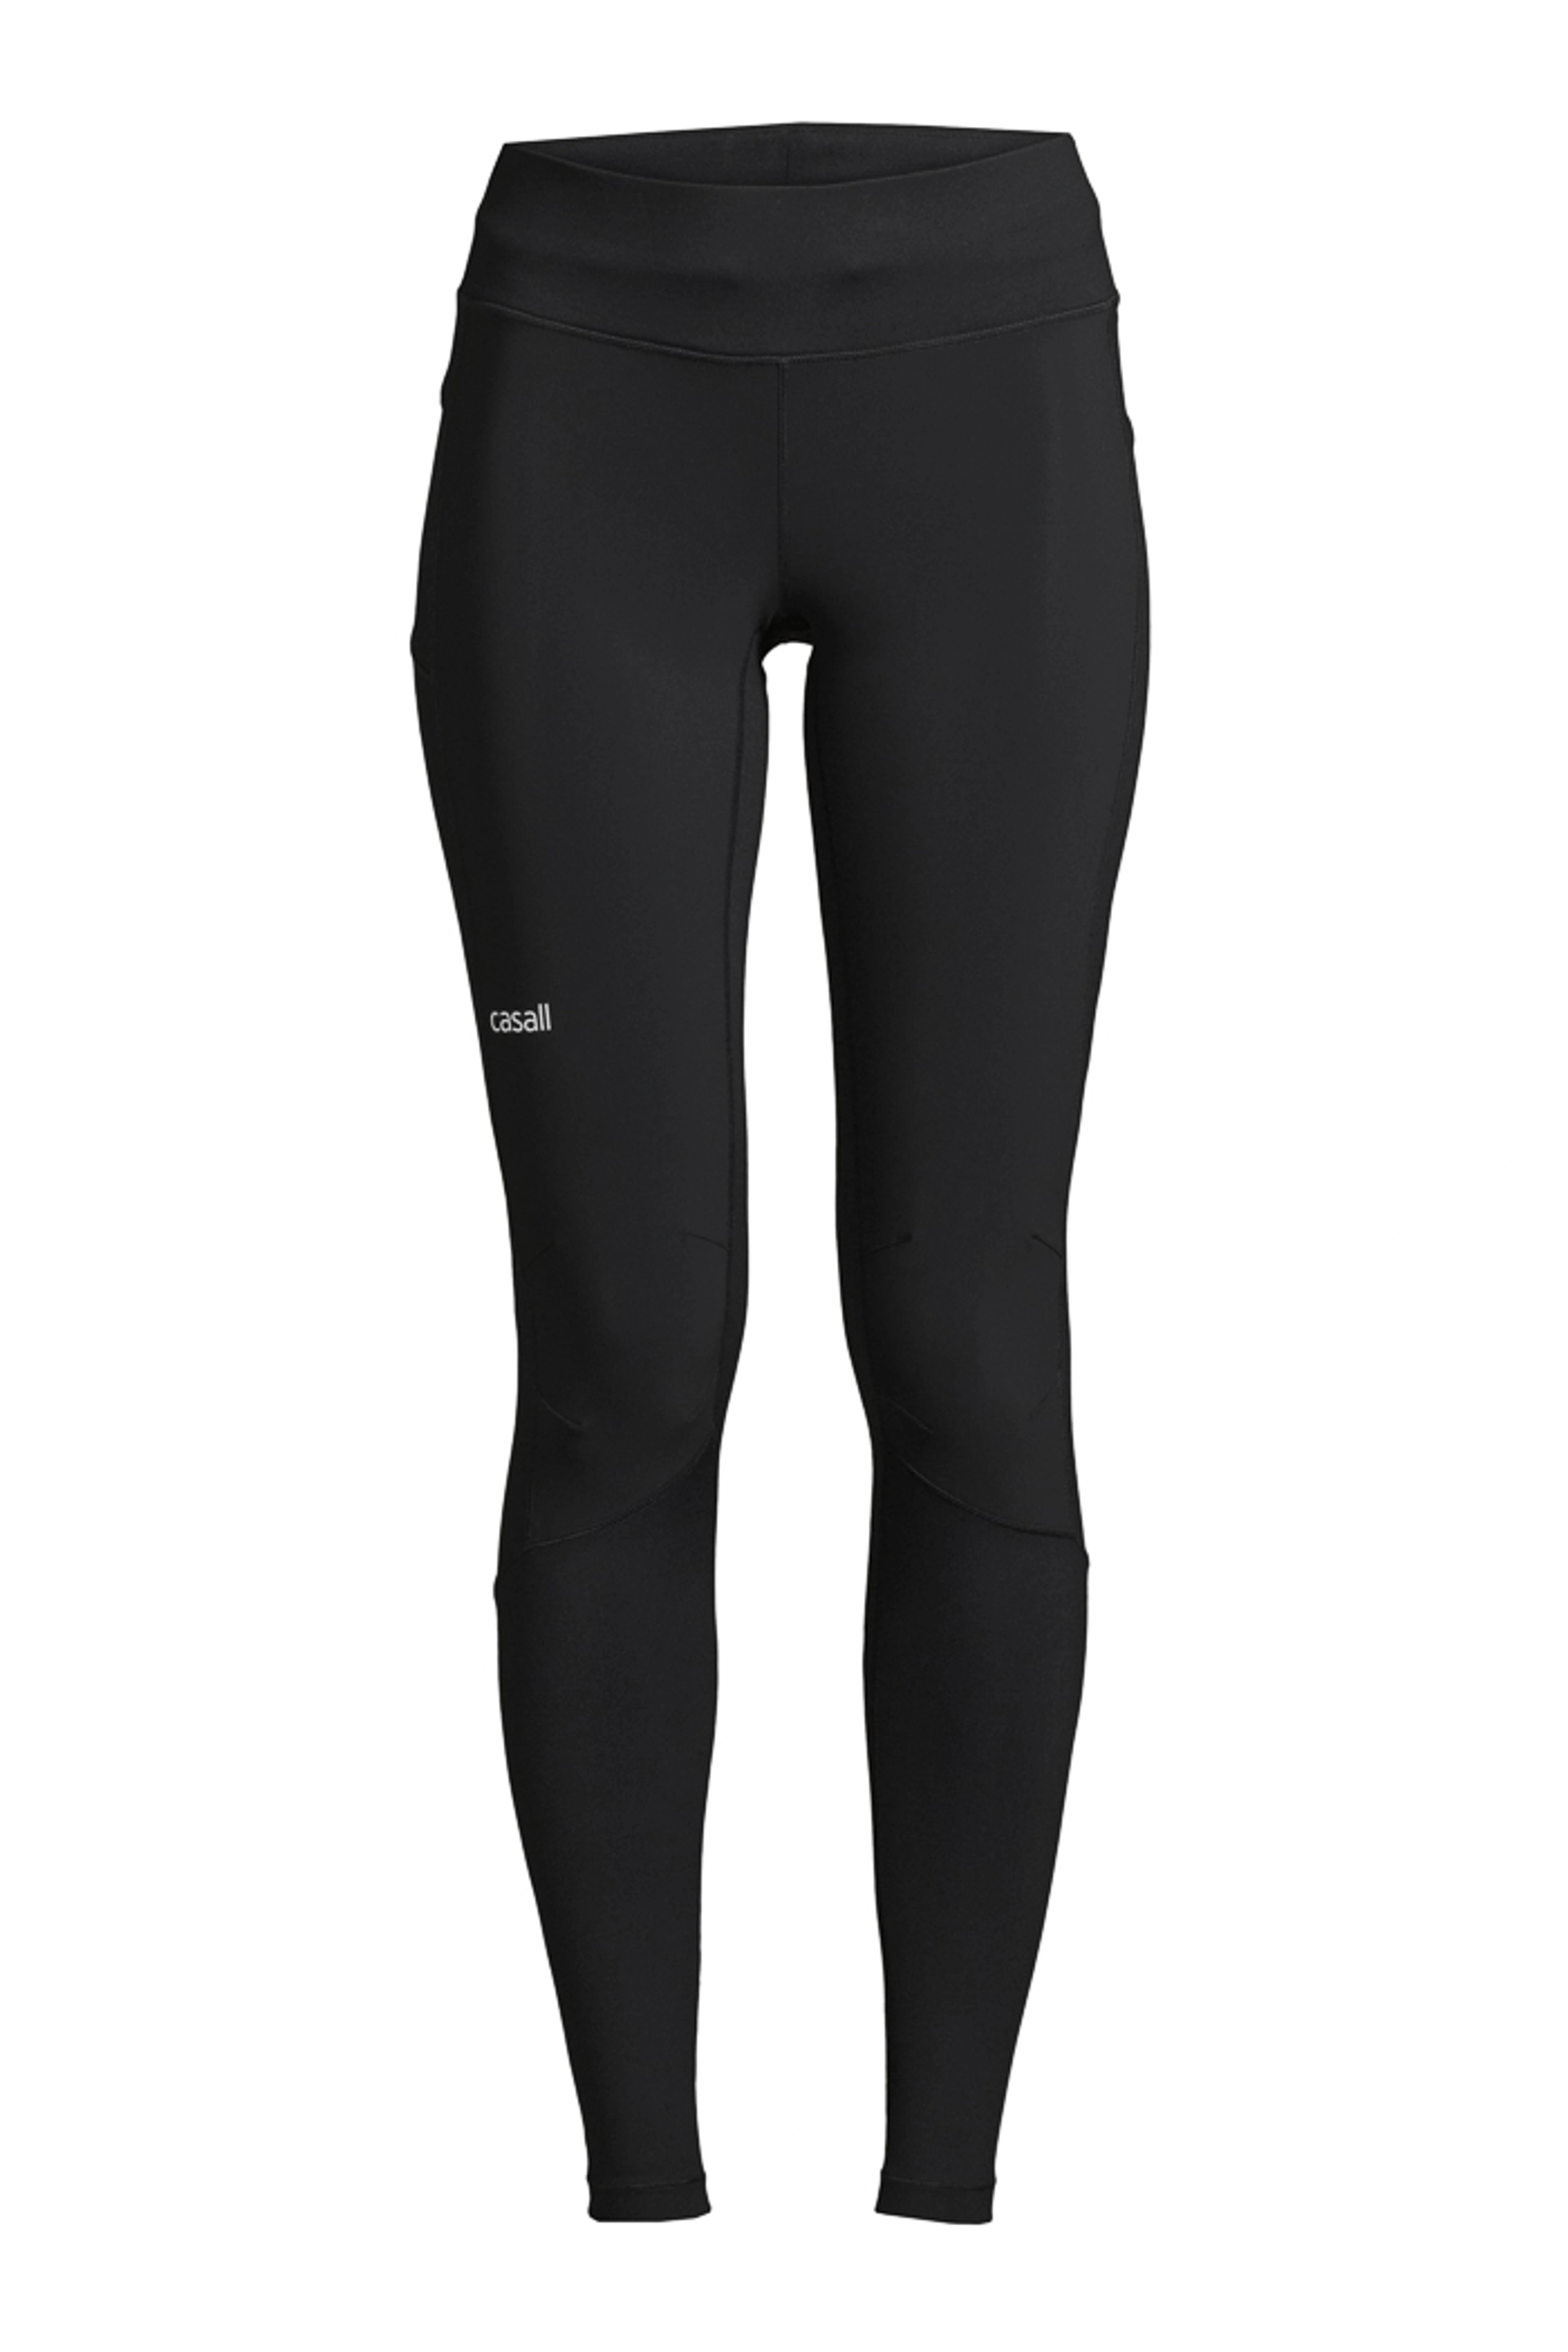 Windtherm Tights